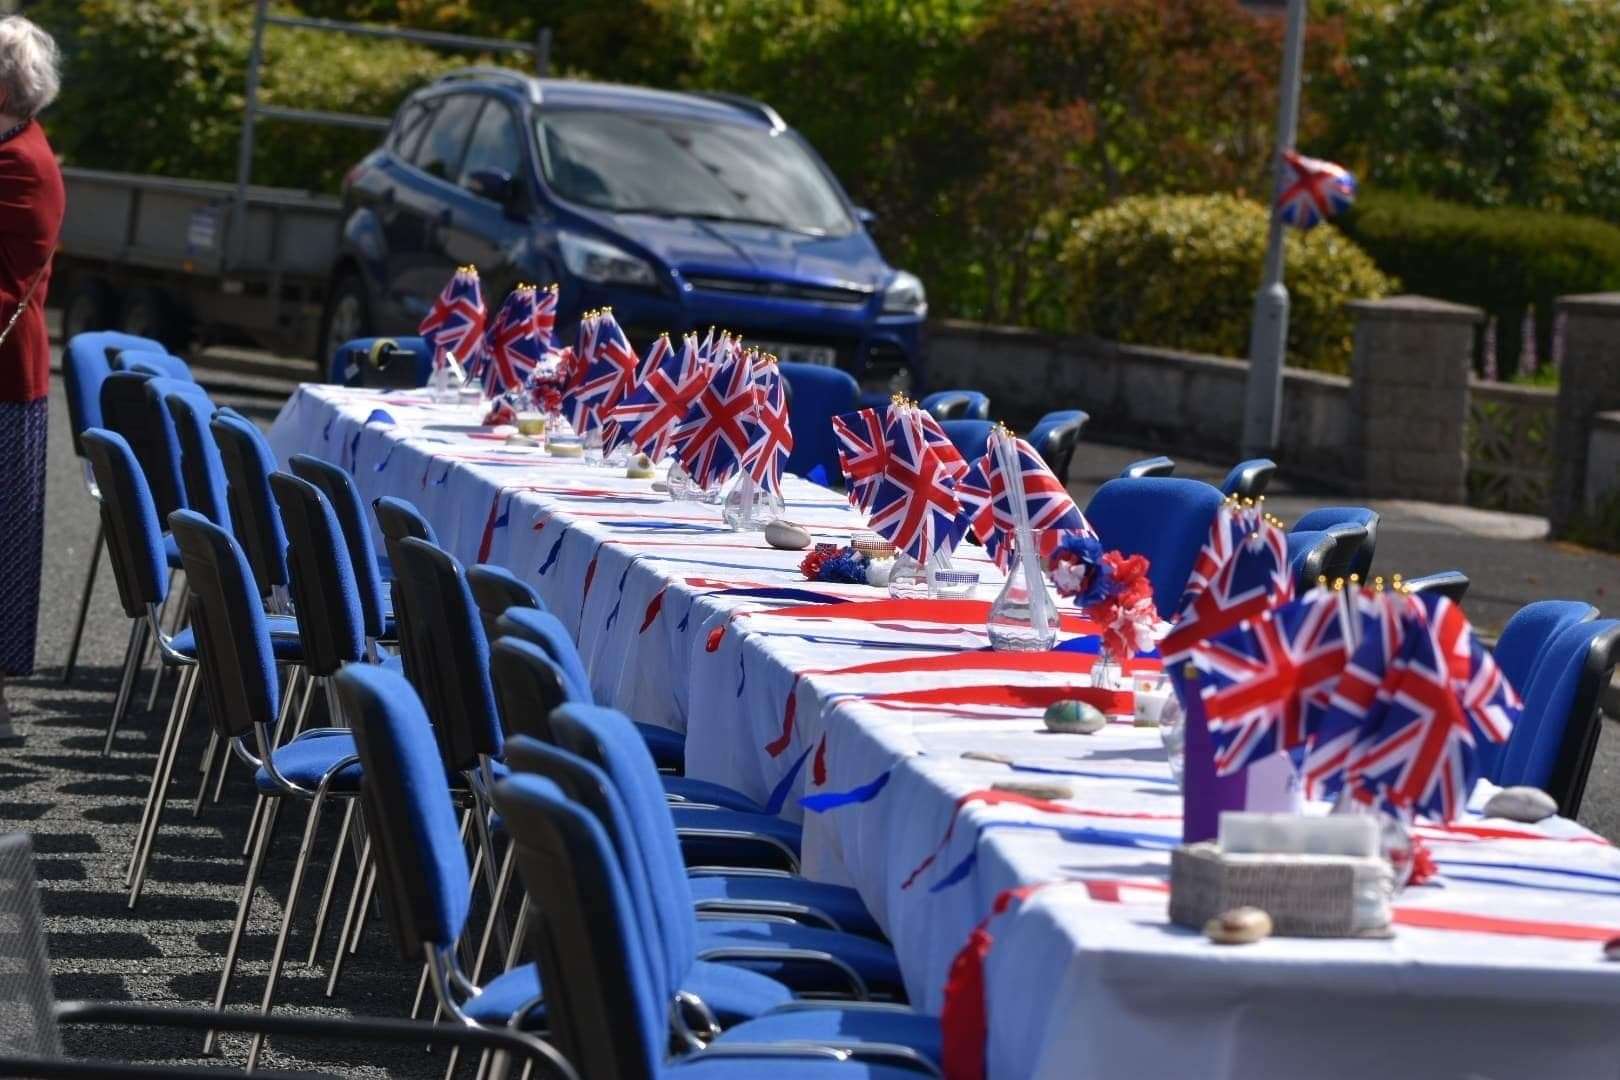 The tables are set up in the street